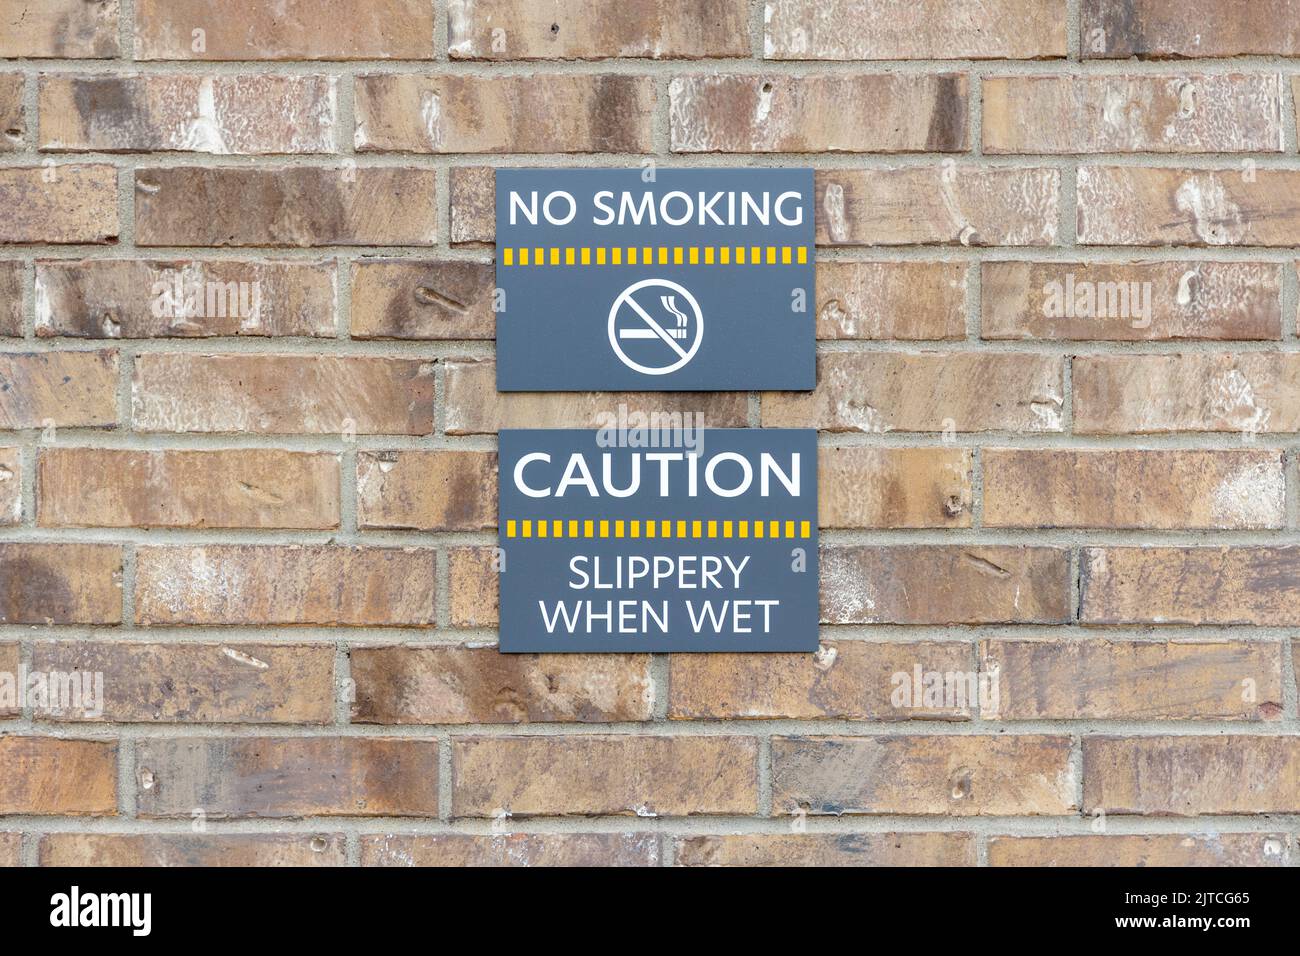 Warning signs No smoking and Slippery when wet on brick wall, warning labels on gray plates Stock Photo